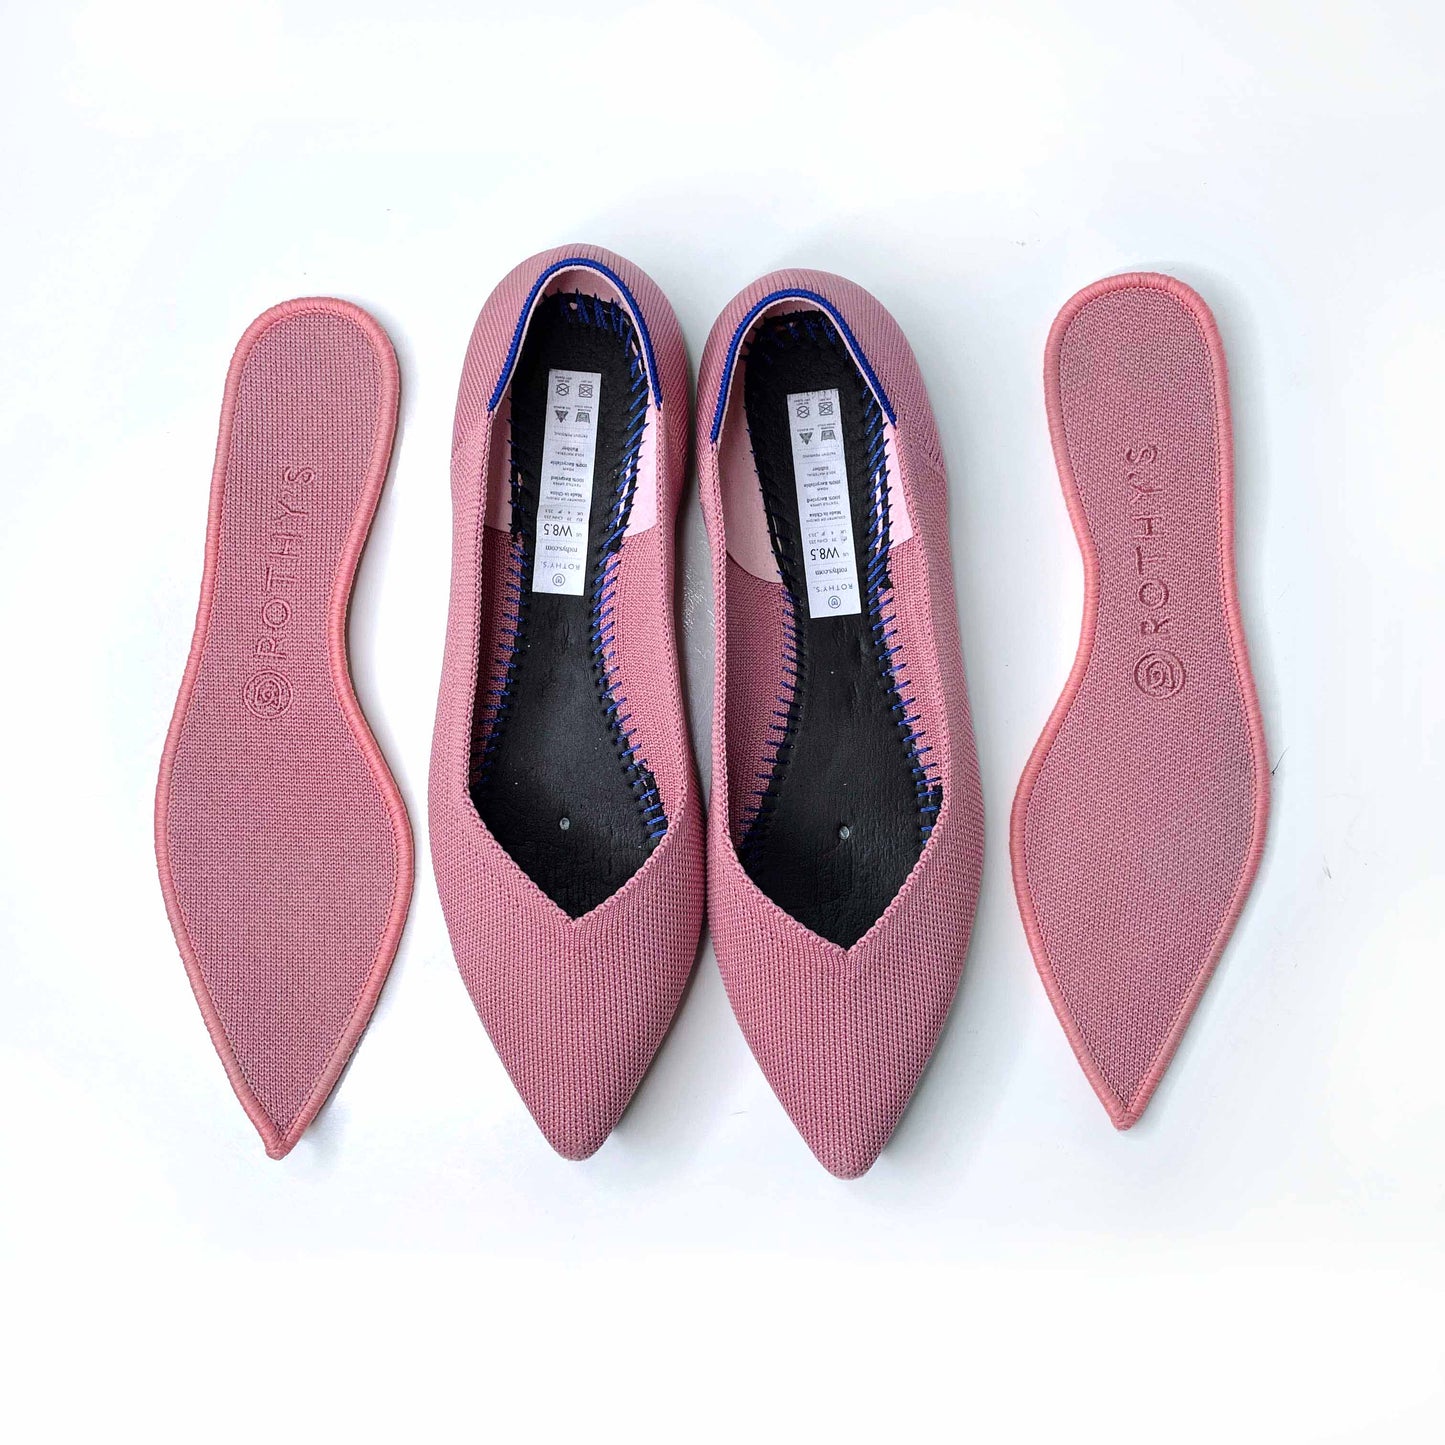 rothy's the point flat shoes in rosebud - size 8.5